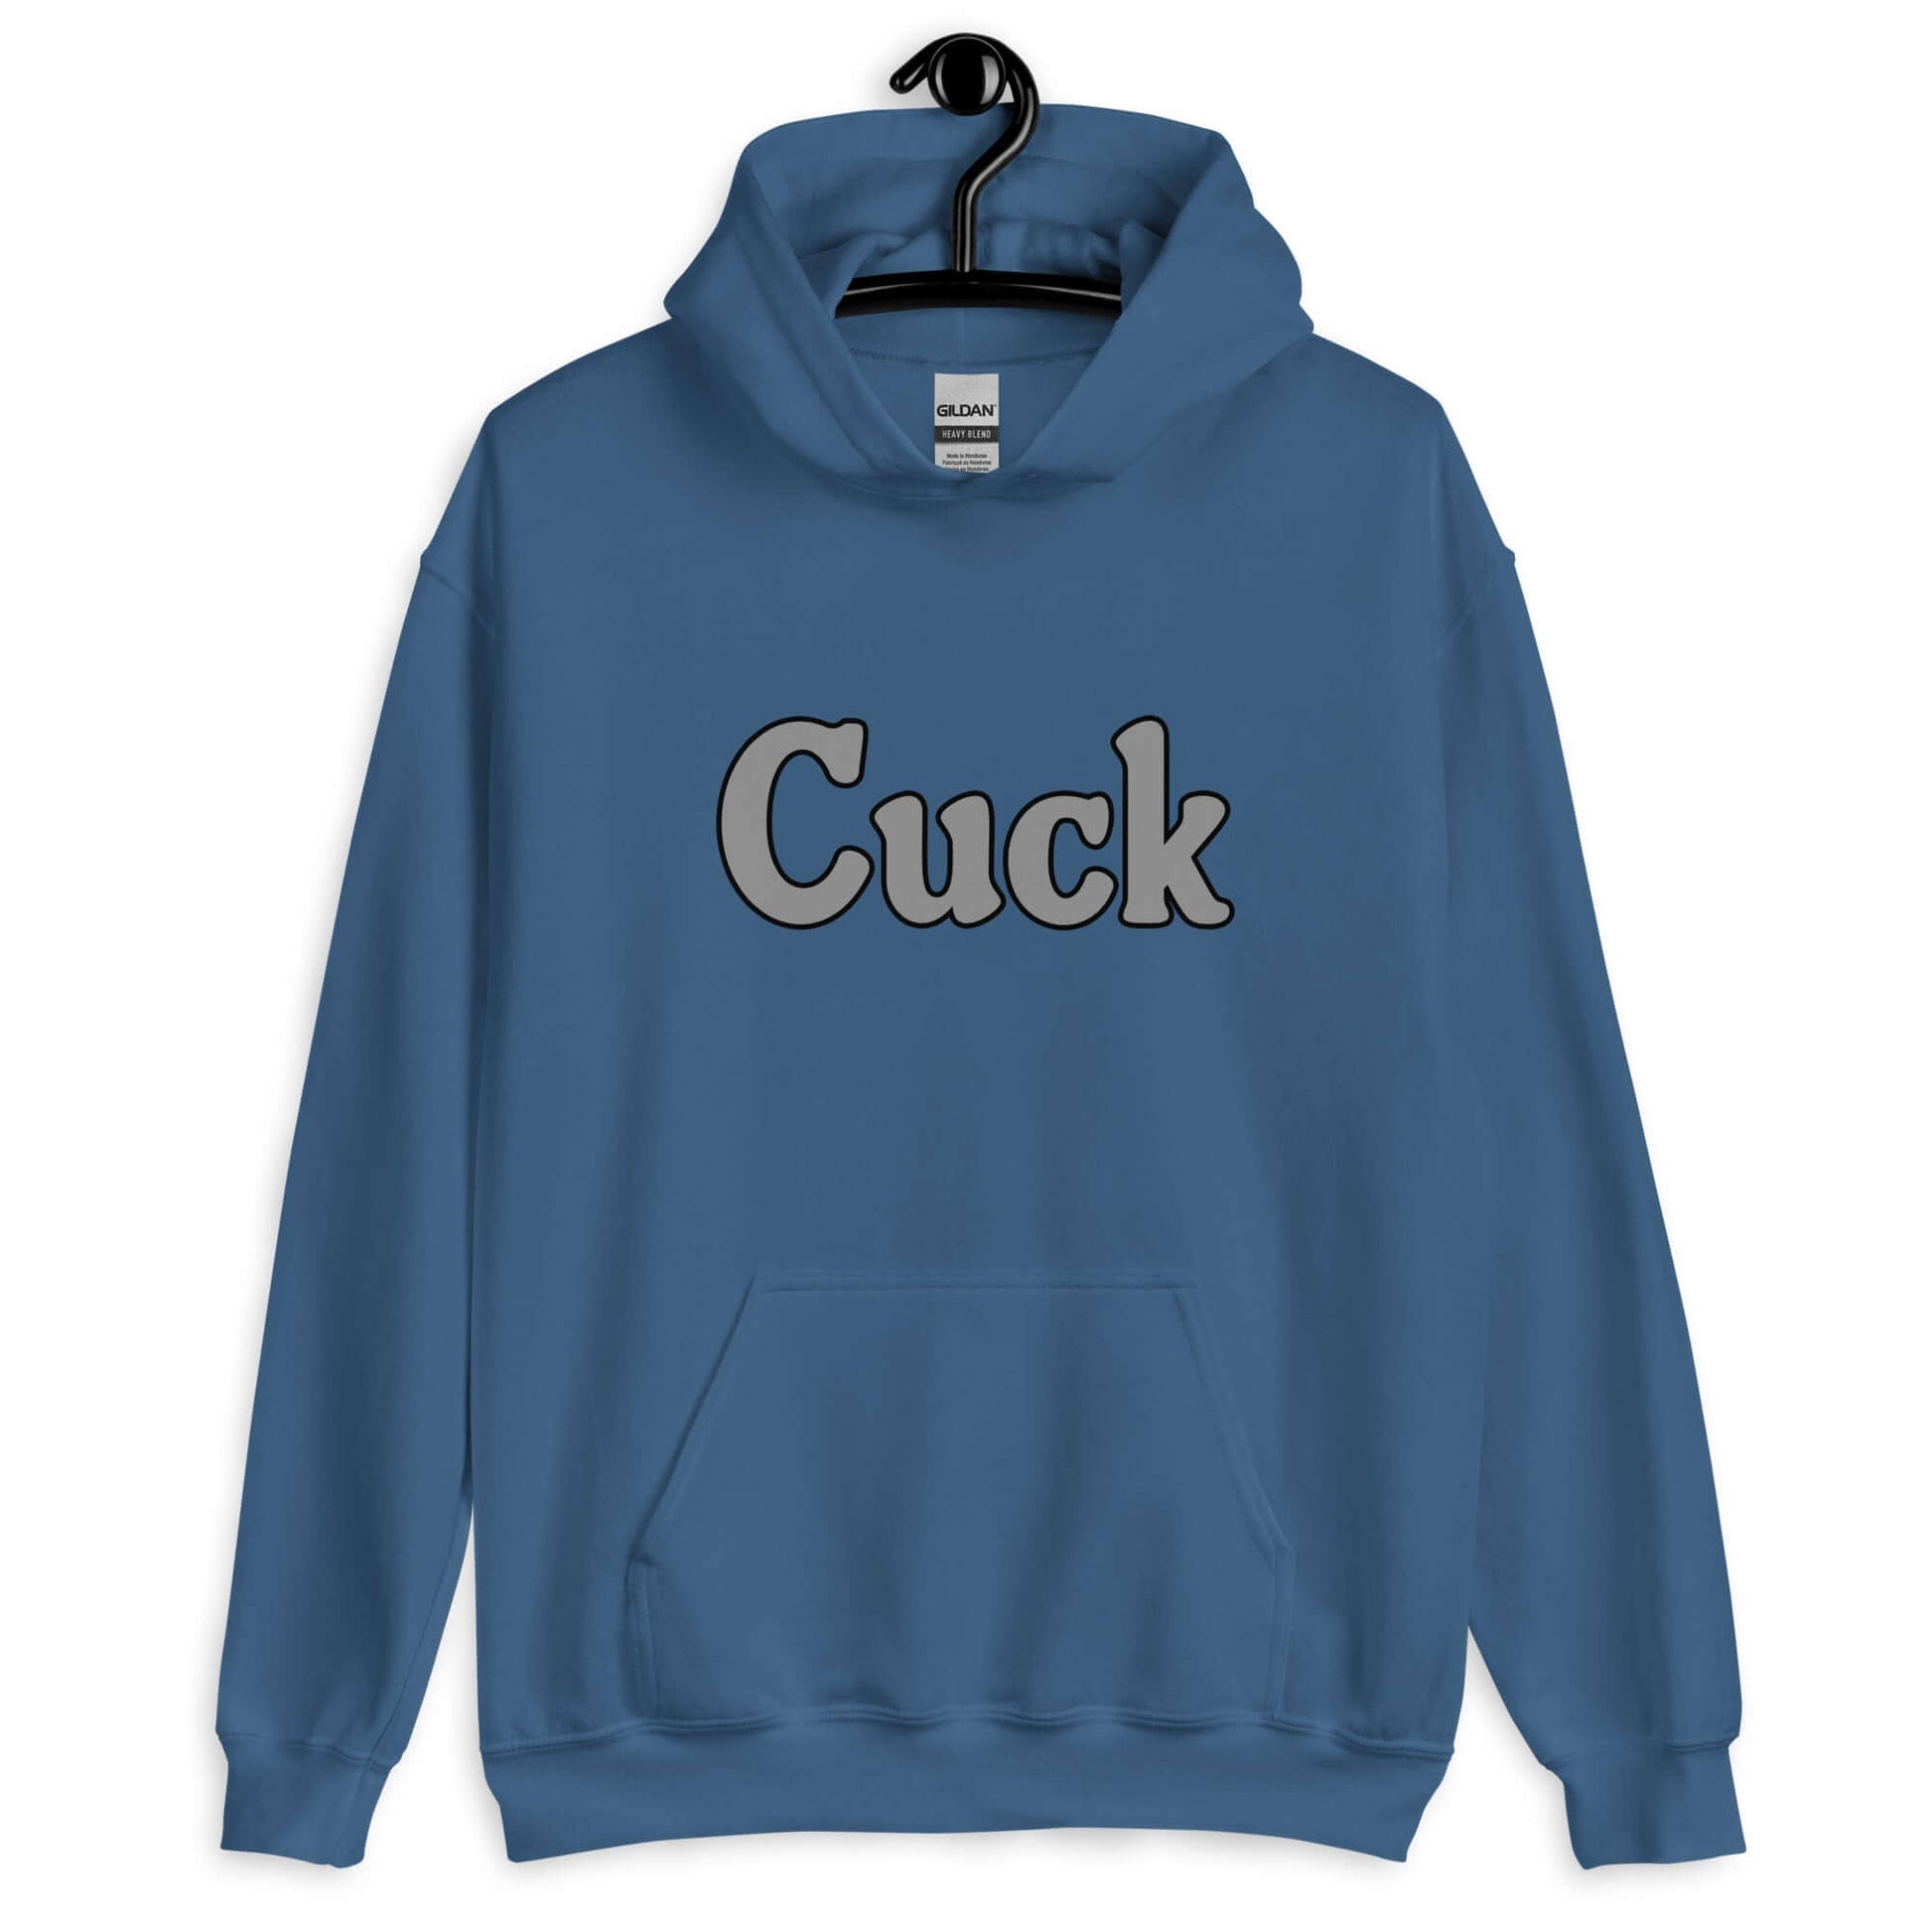 Indigo blue hoodie sweatshirt with the word Cuck printed on the front in grey.